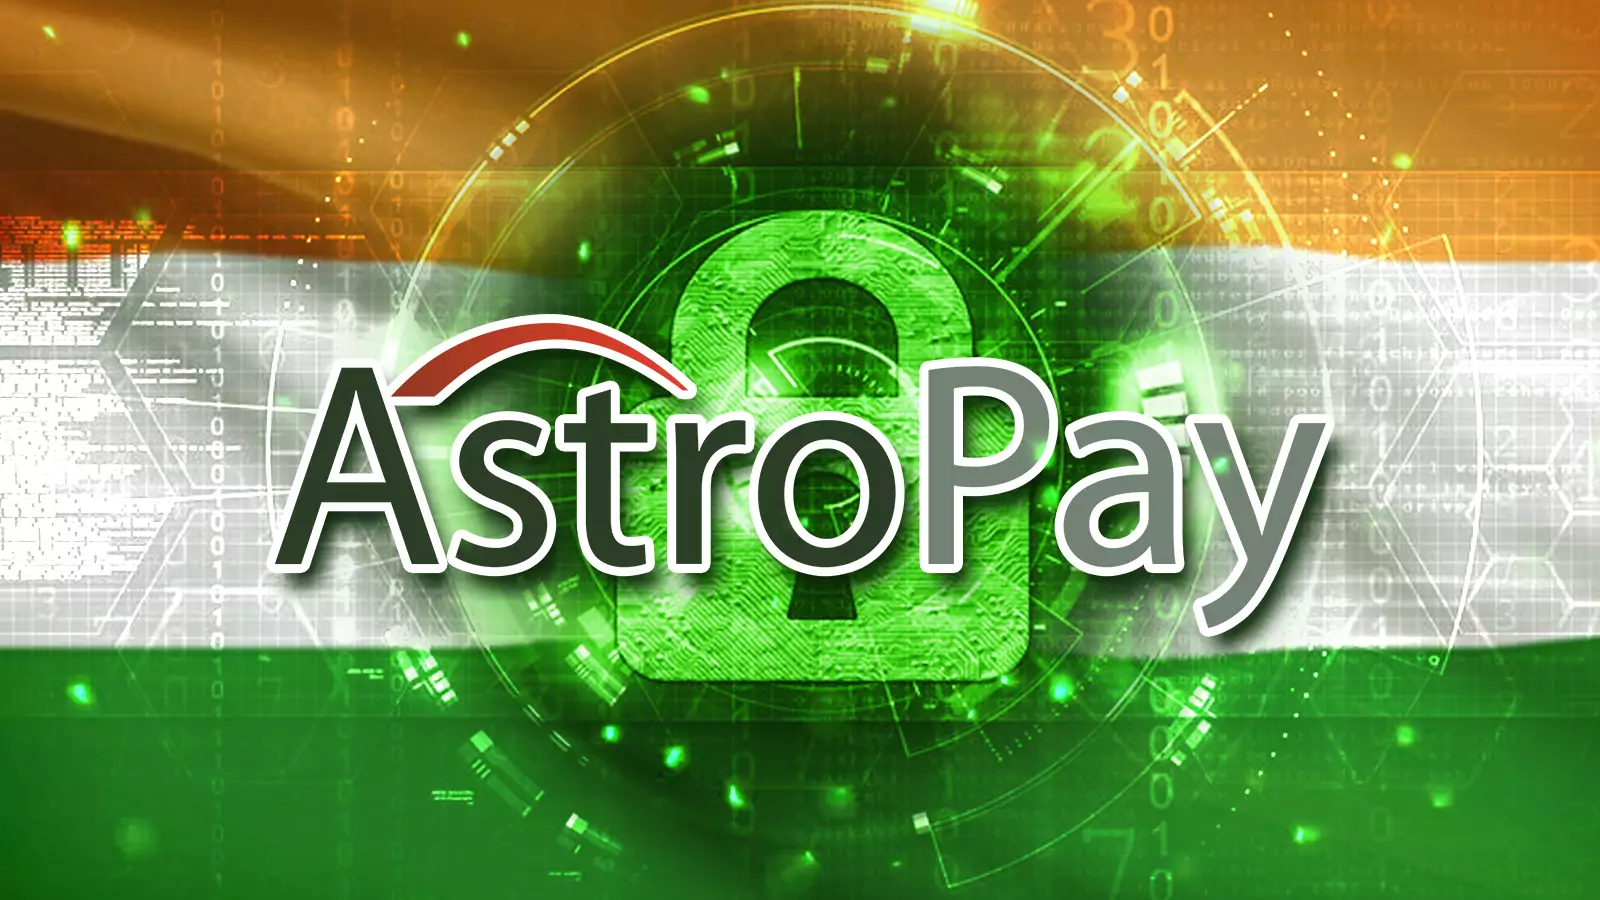 Your personal information and money are absolutely safe in Astropay system.